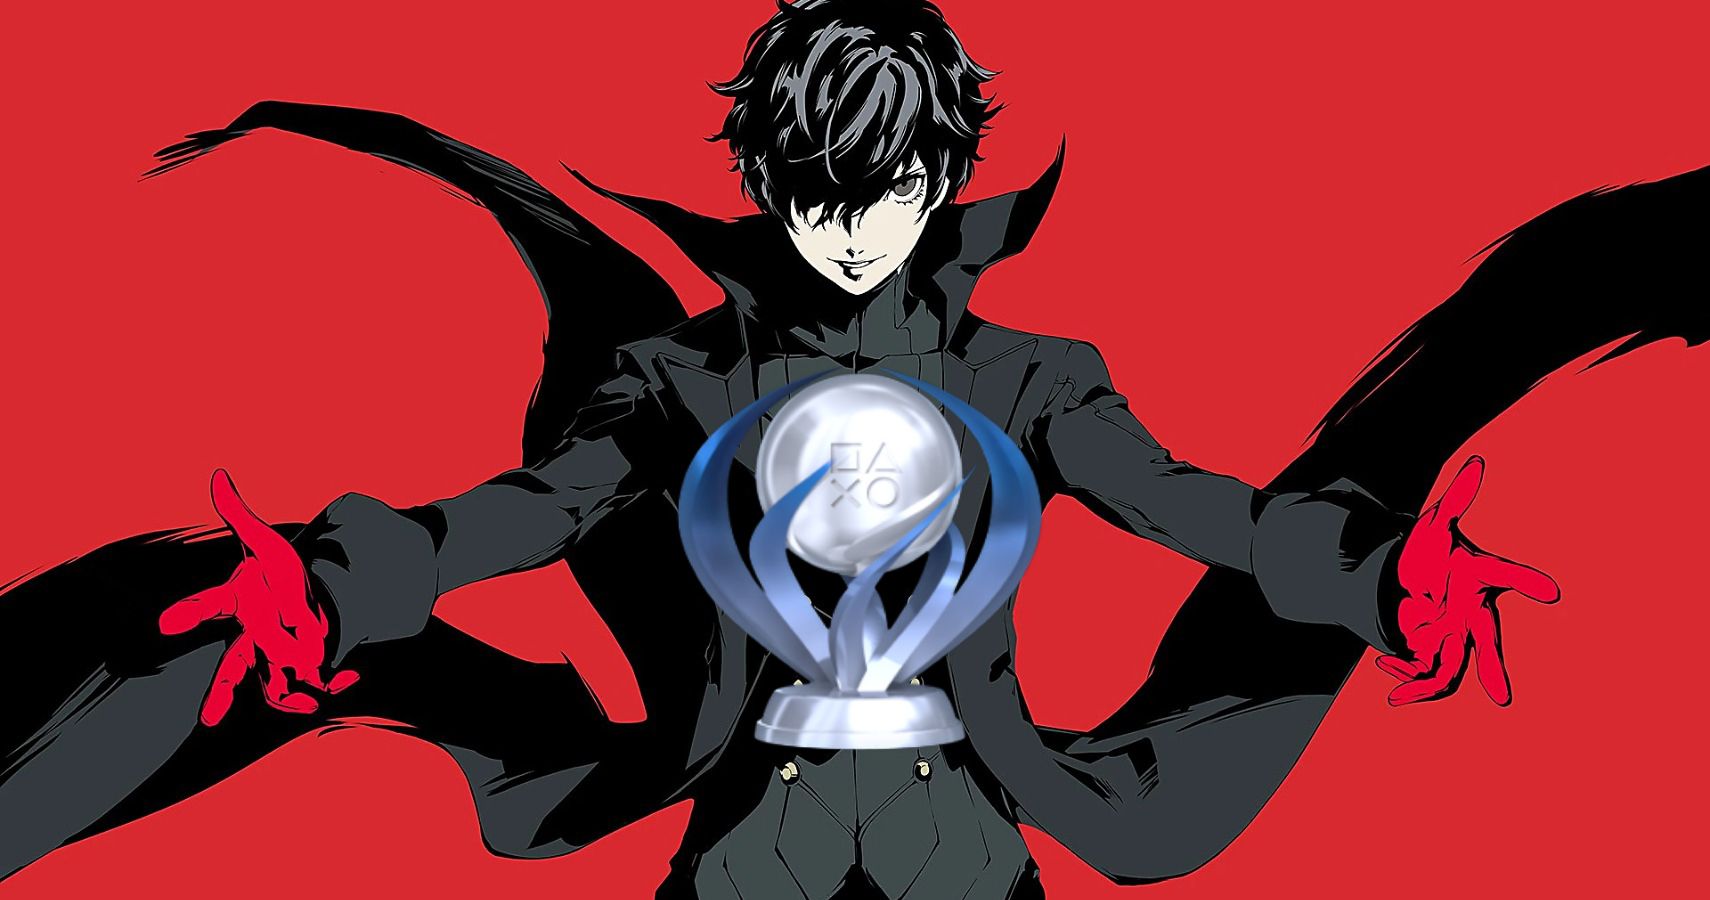 persona-5-royal-has-more-platinum-trophies-than-any-other-major-ps4-exclusive